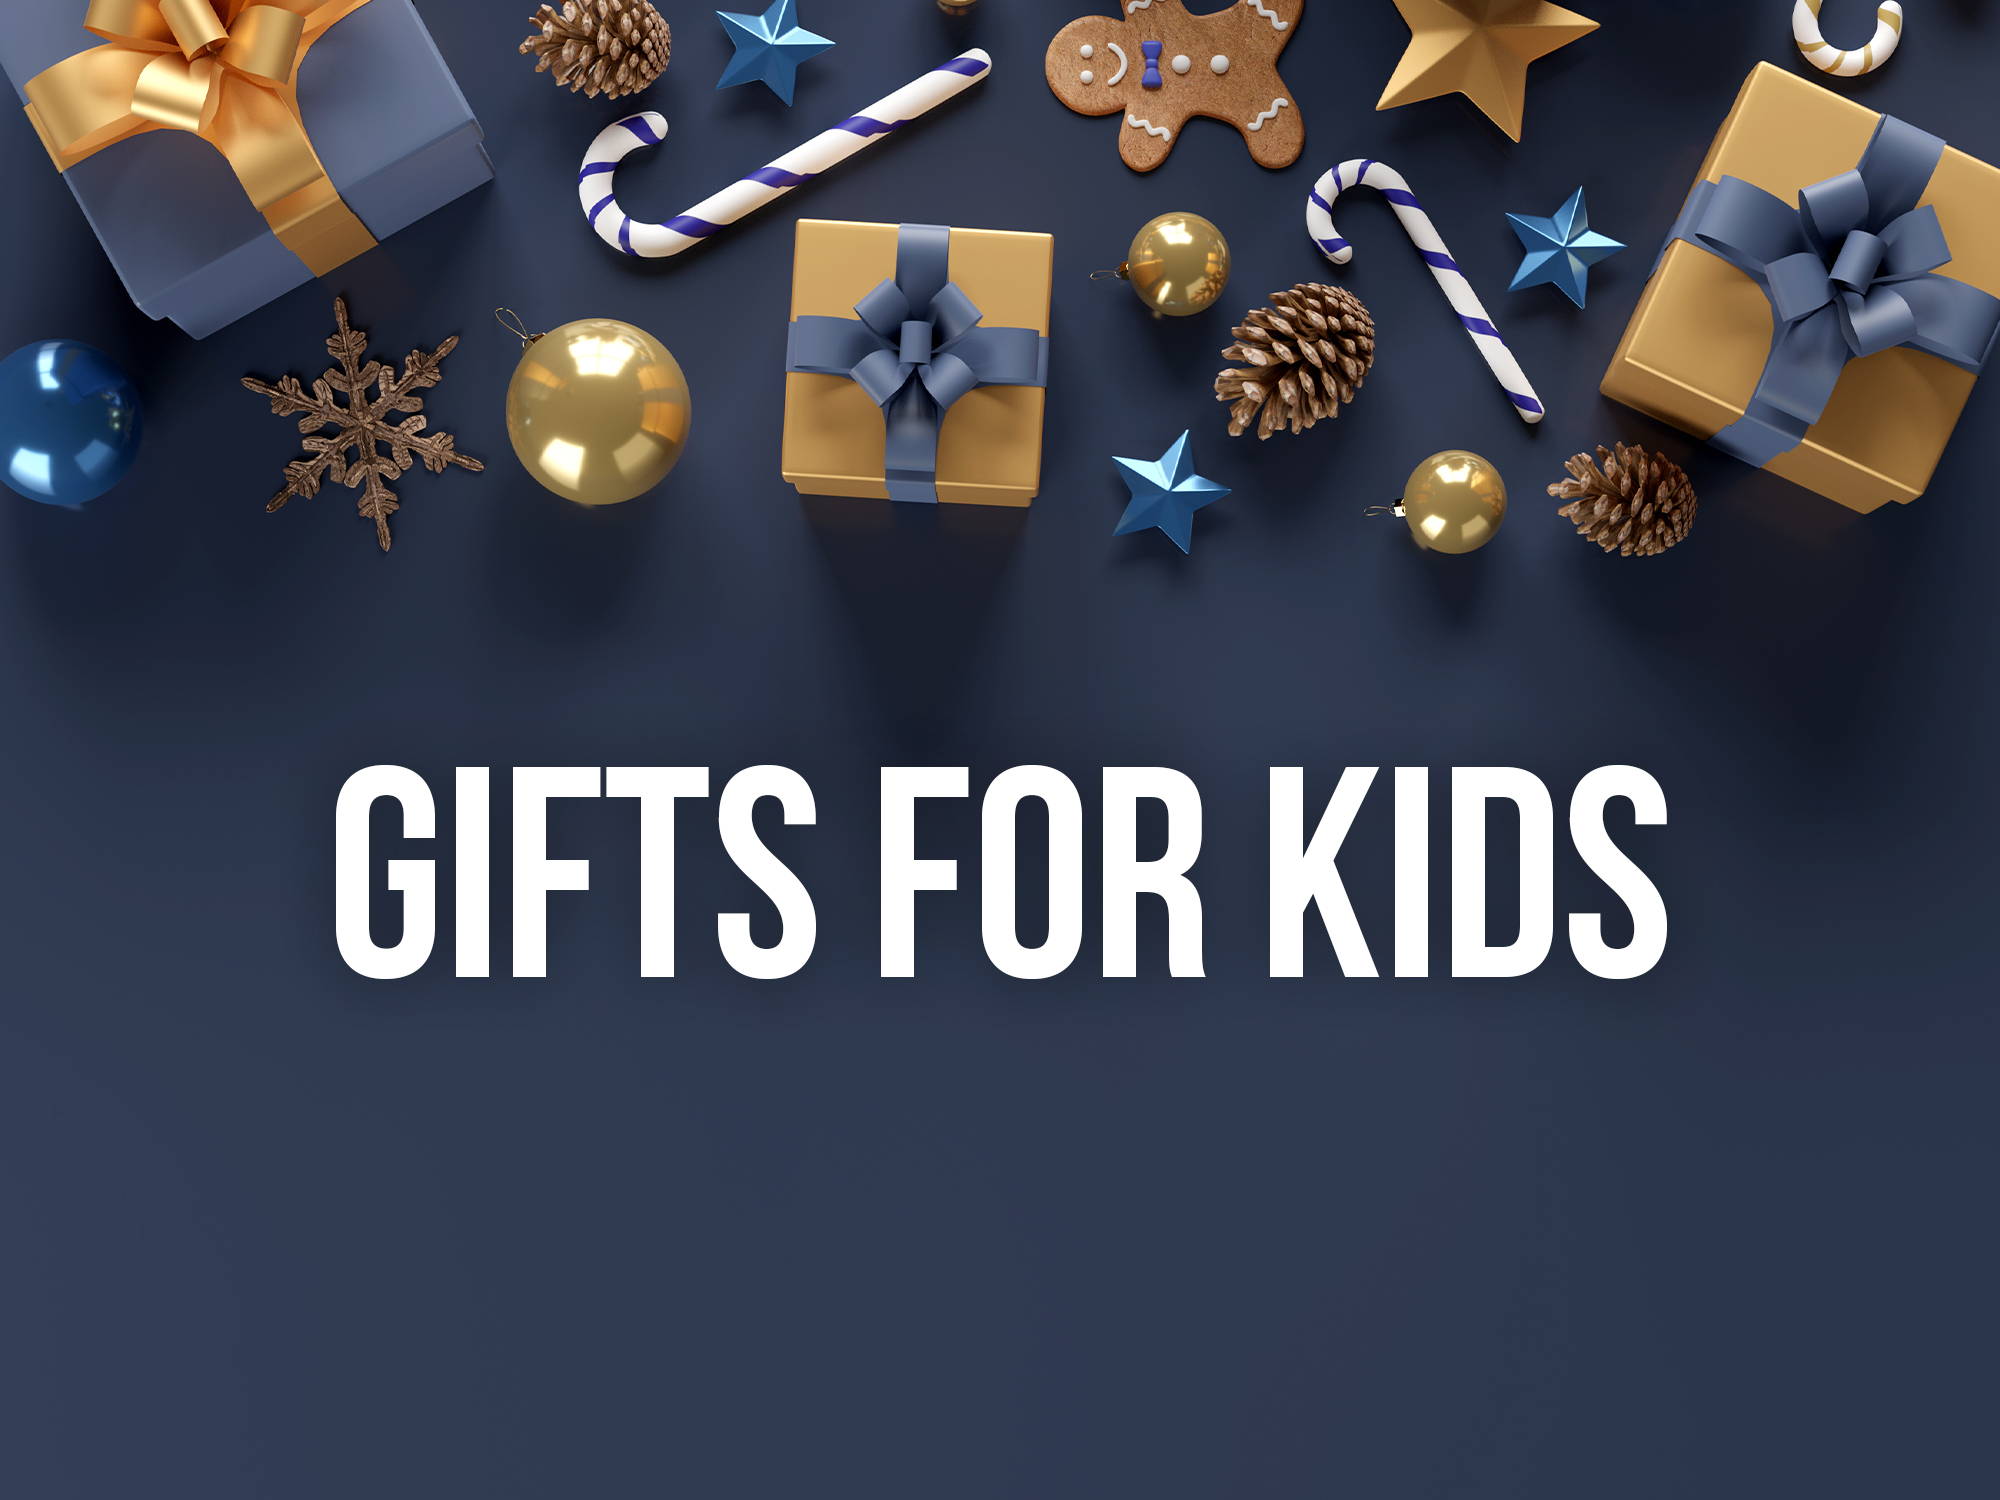 Gifts For Kids collection